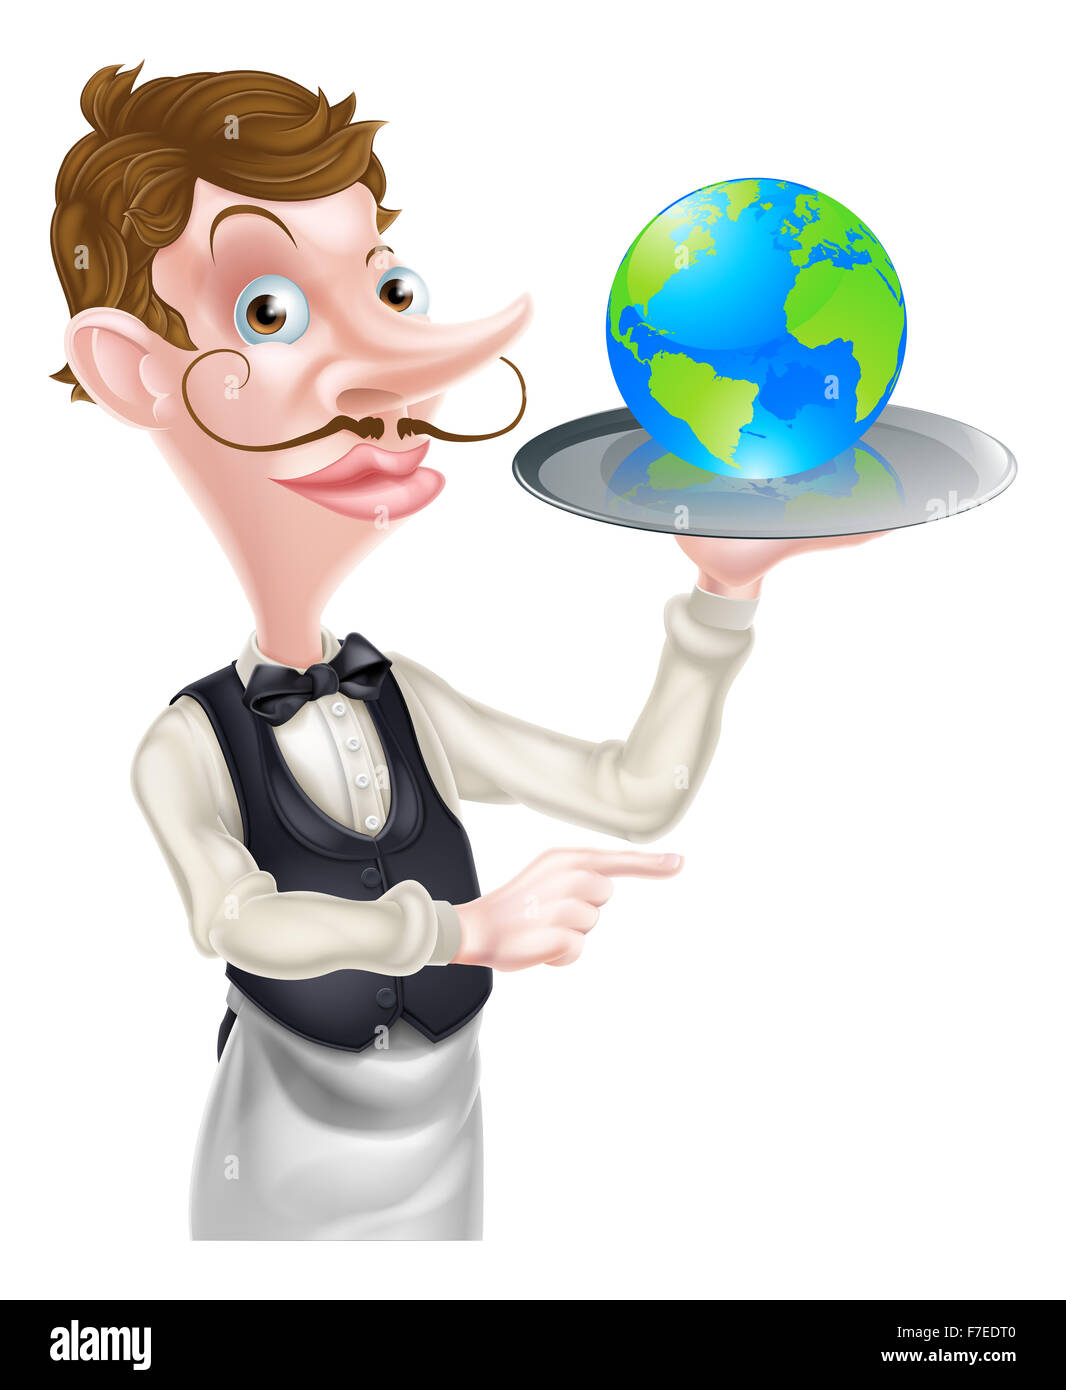 A cartoon waiter pointing and holding a tray with a world globe on it. could be a concept for world food Stock Photo